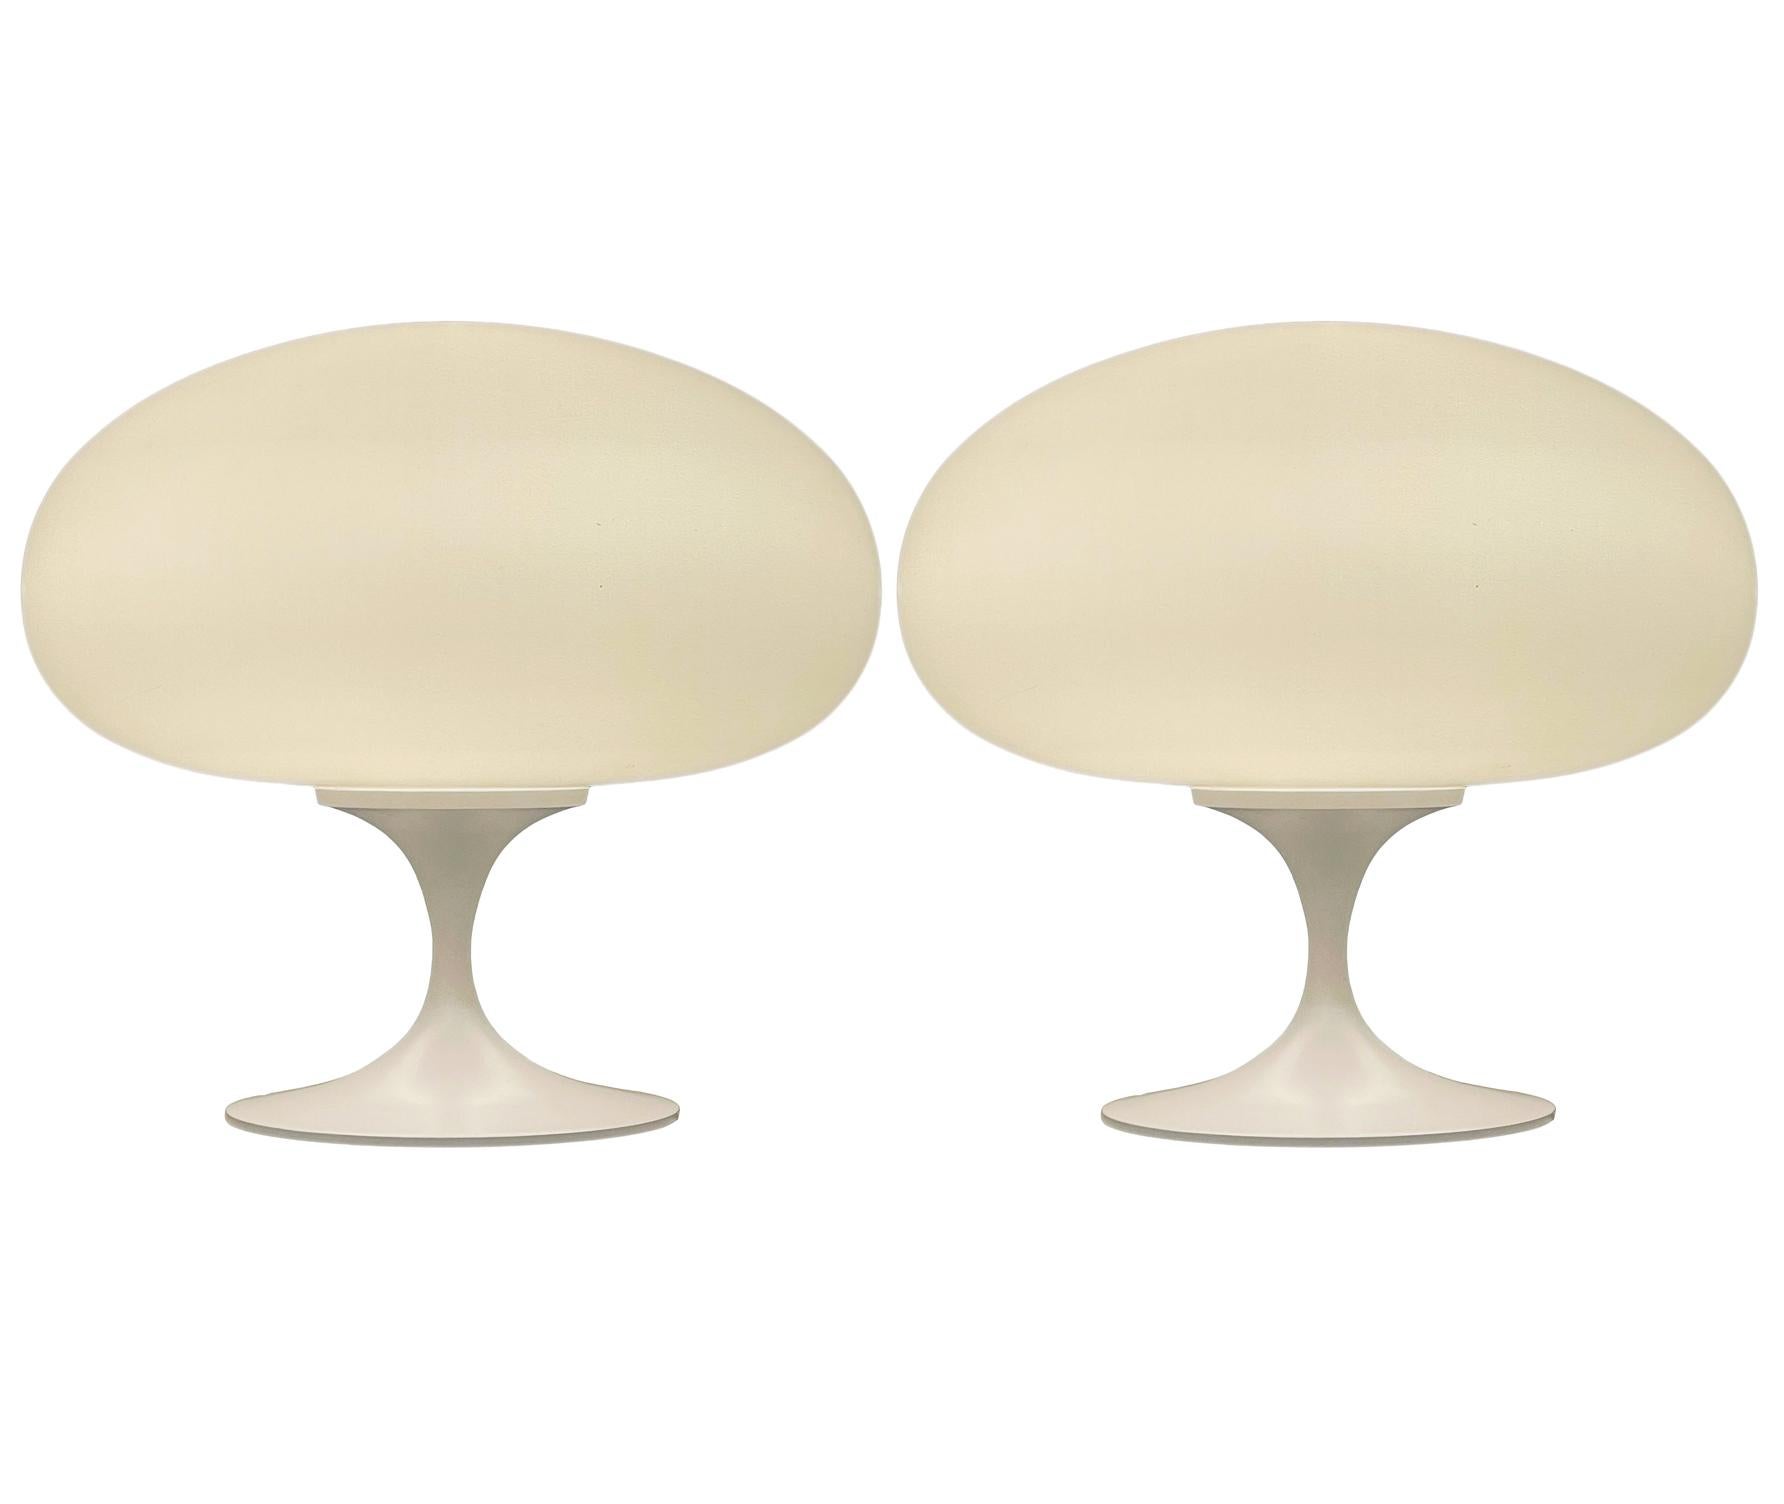 Contemporary Pair of Mid-Century Tulip Table Lamps by Designline in White on White Glass For Sale